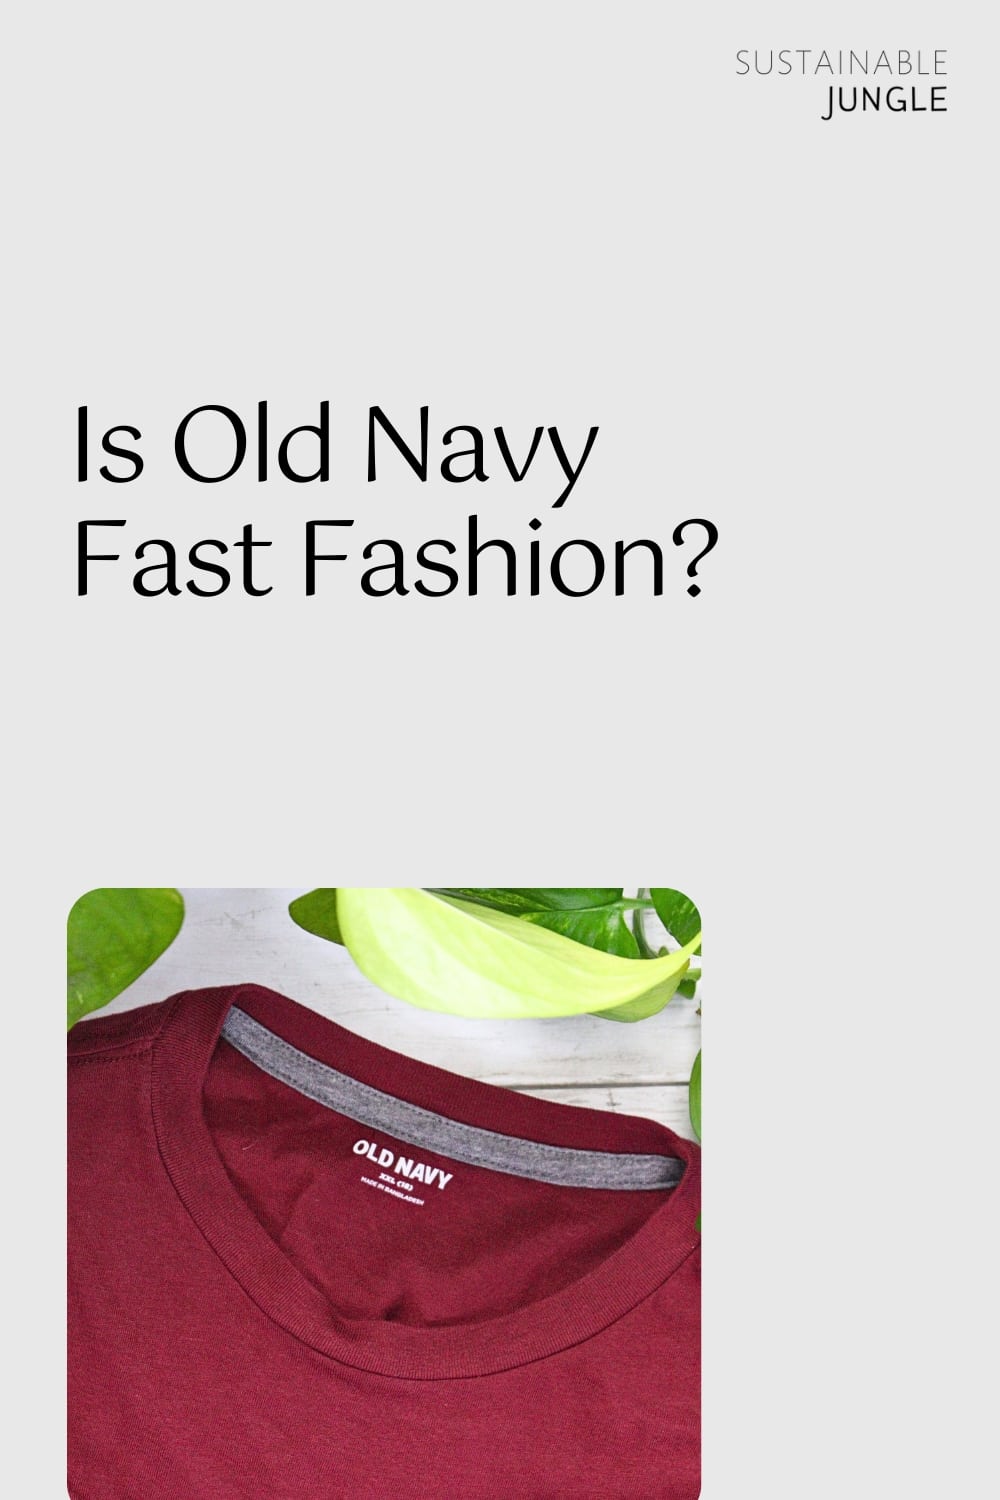 Is Old Navy Fast Fashion? Image by Sustainable Jungle #isoldnavyfastfashion #isoldnavyethical #oldnavyethics #isoldnavysustainable #oldnavysustainability #oldnavycontroversy #sustainablejungle